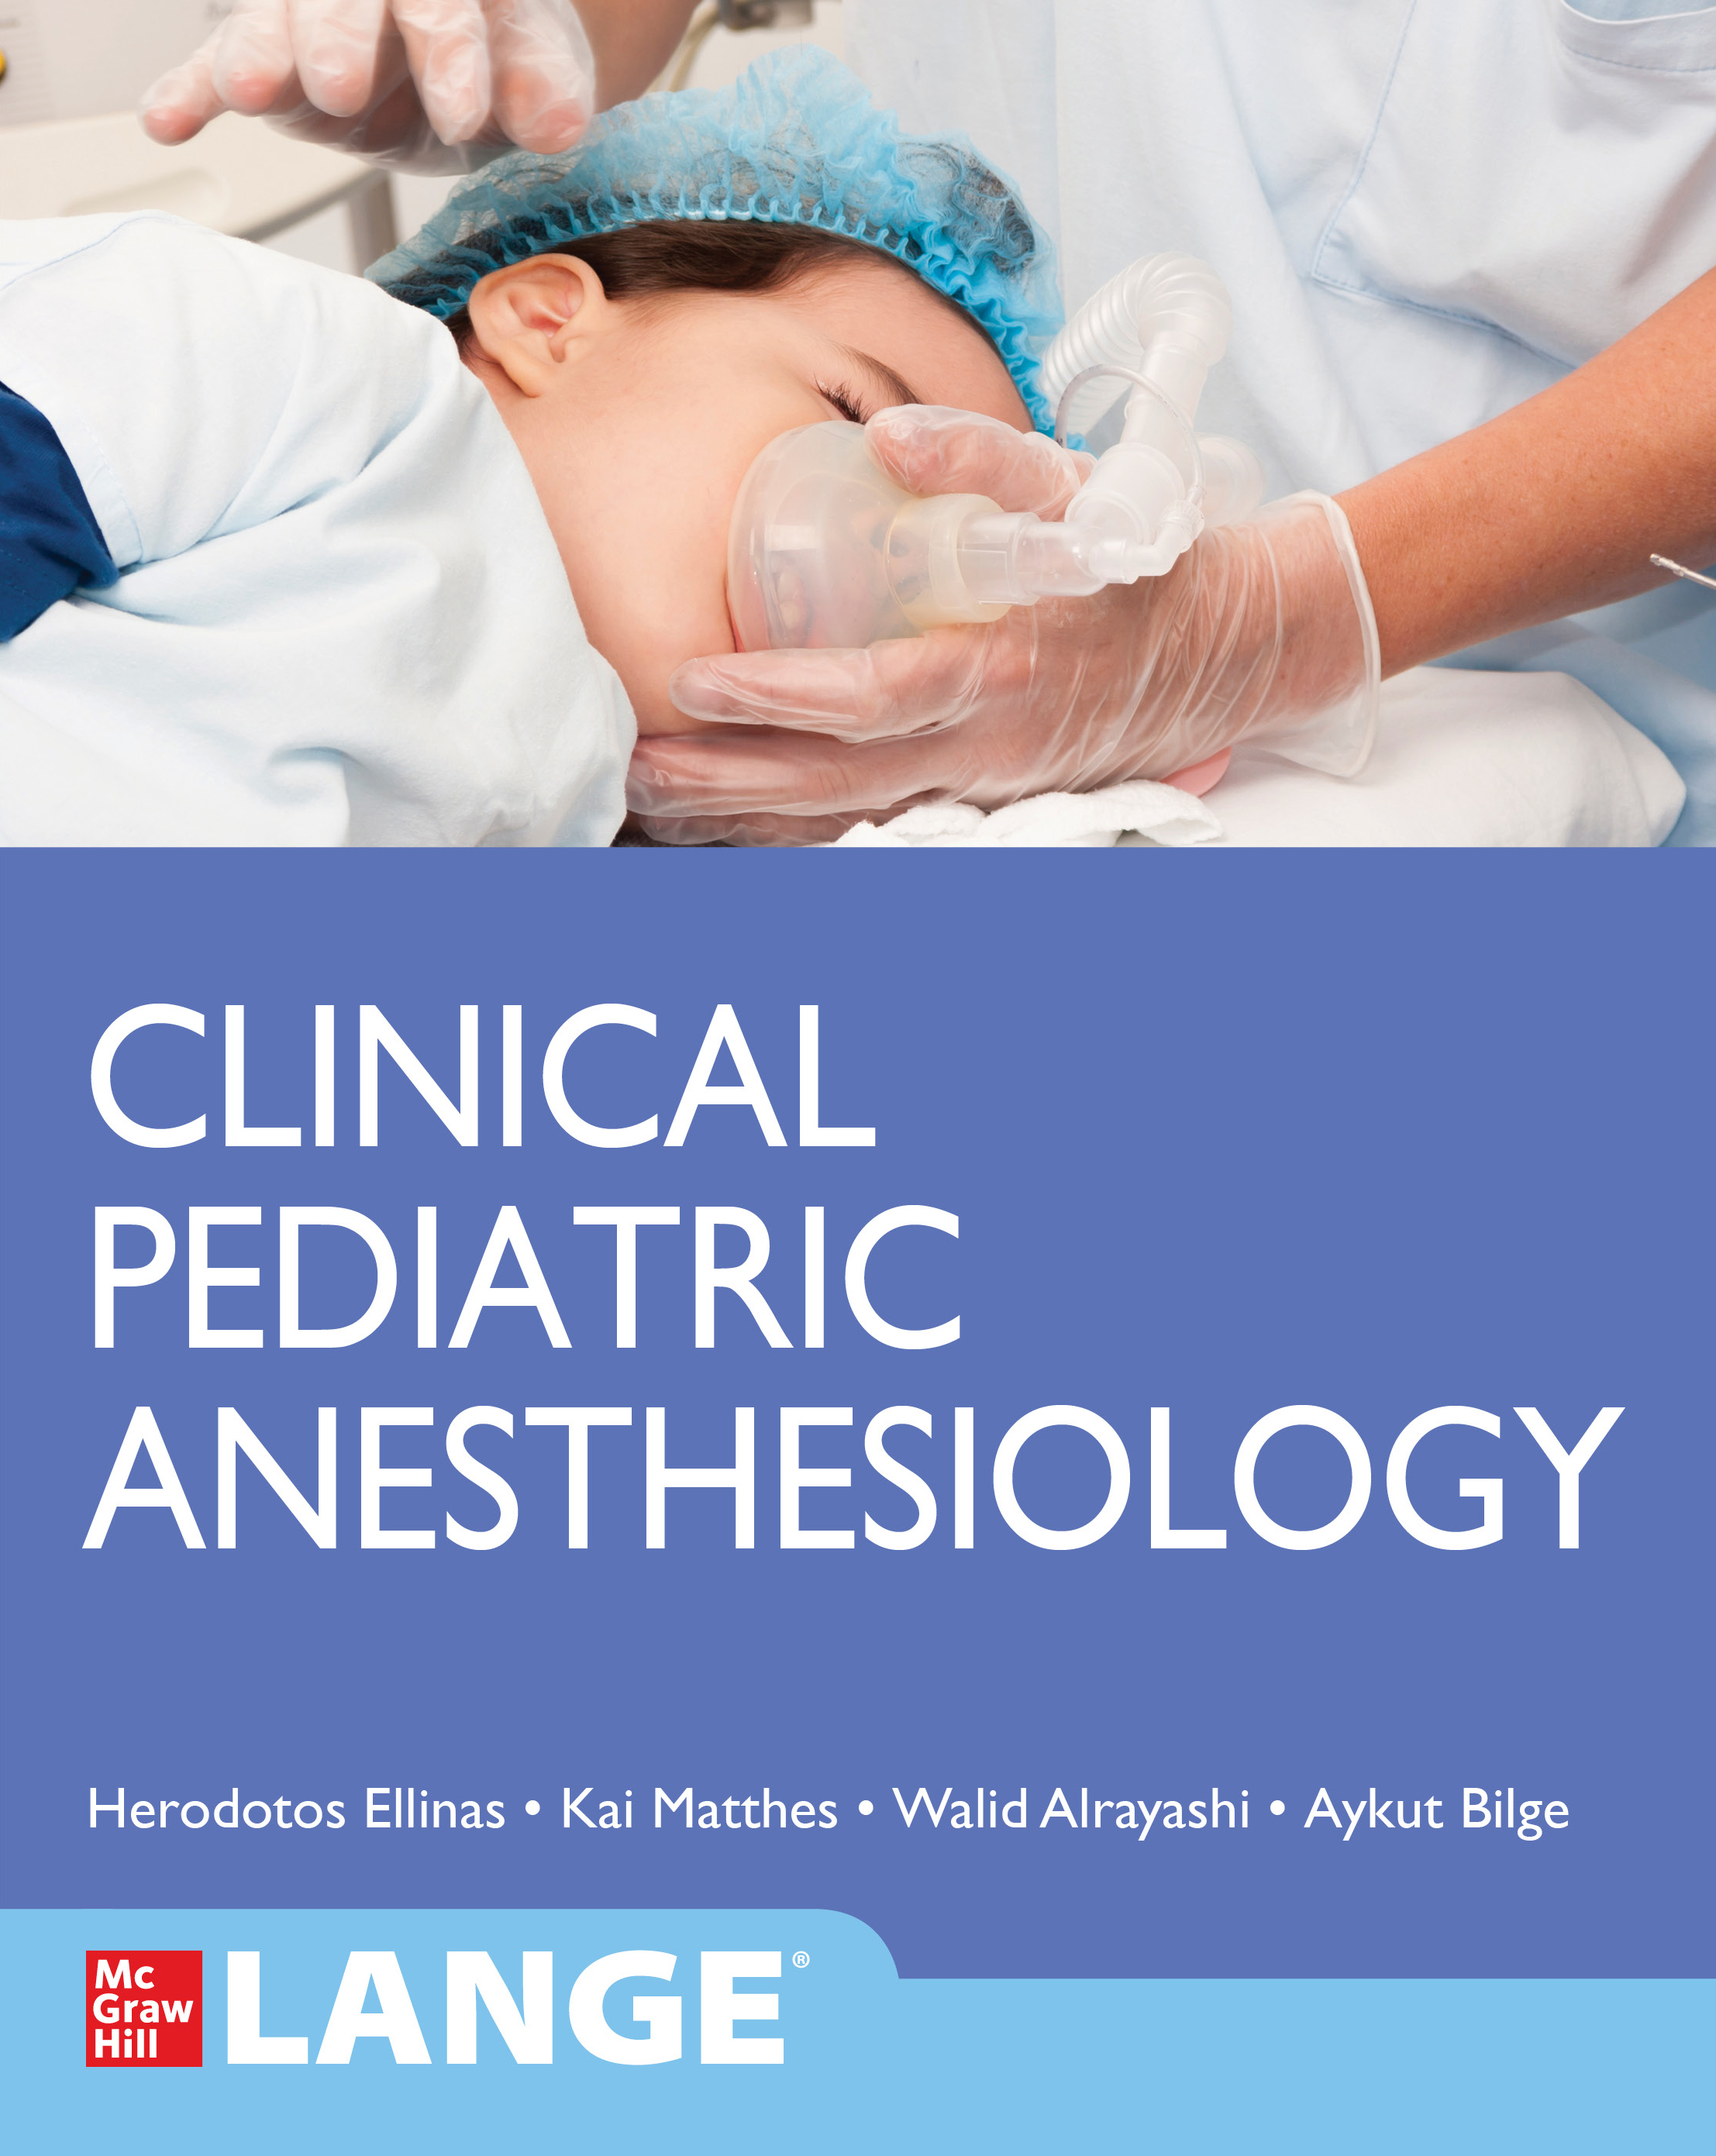 Clinical Pediatric Anesthesiology (Lange)